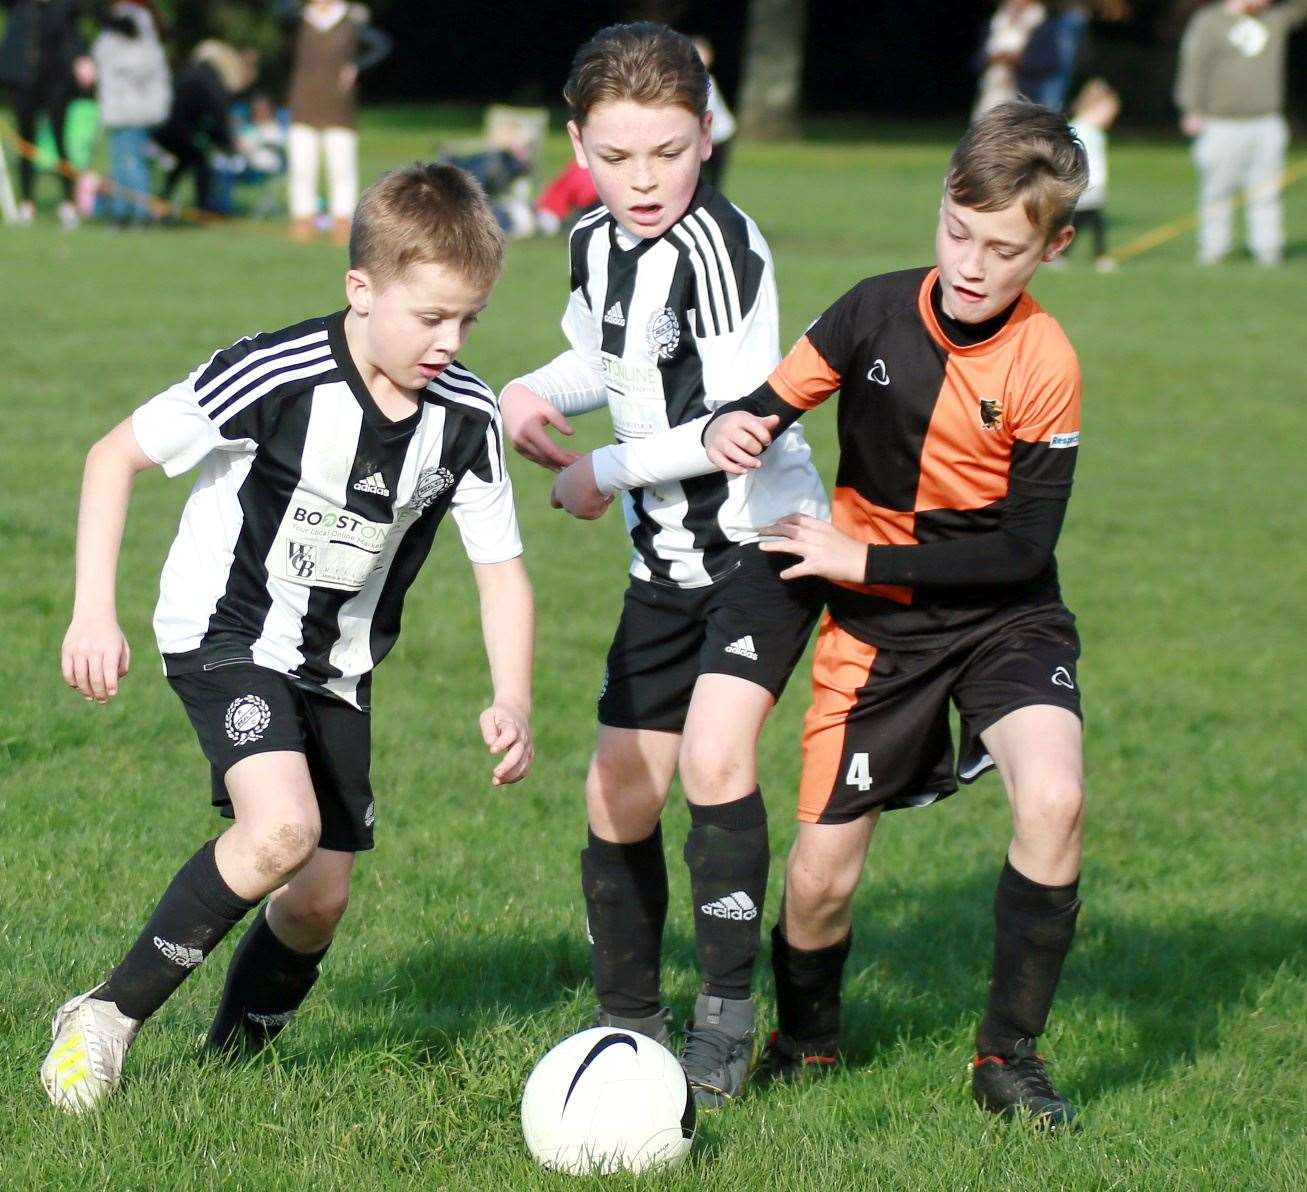 Real 60 Panthers under-10s up against Pegasus 81 Flyers under-10s Picture: Phil Lee